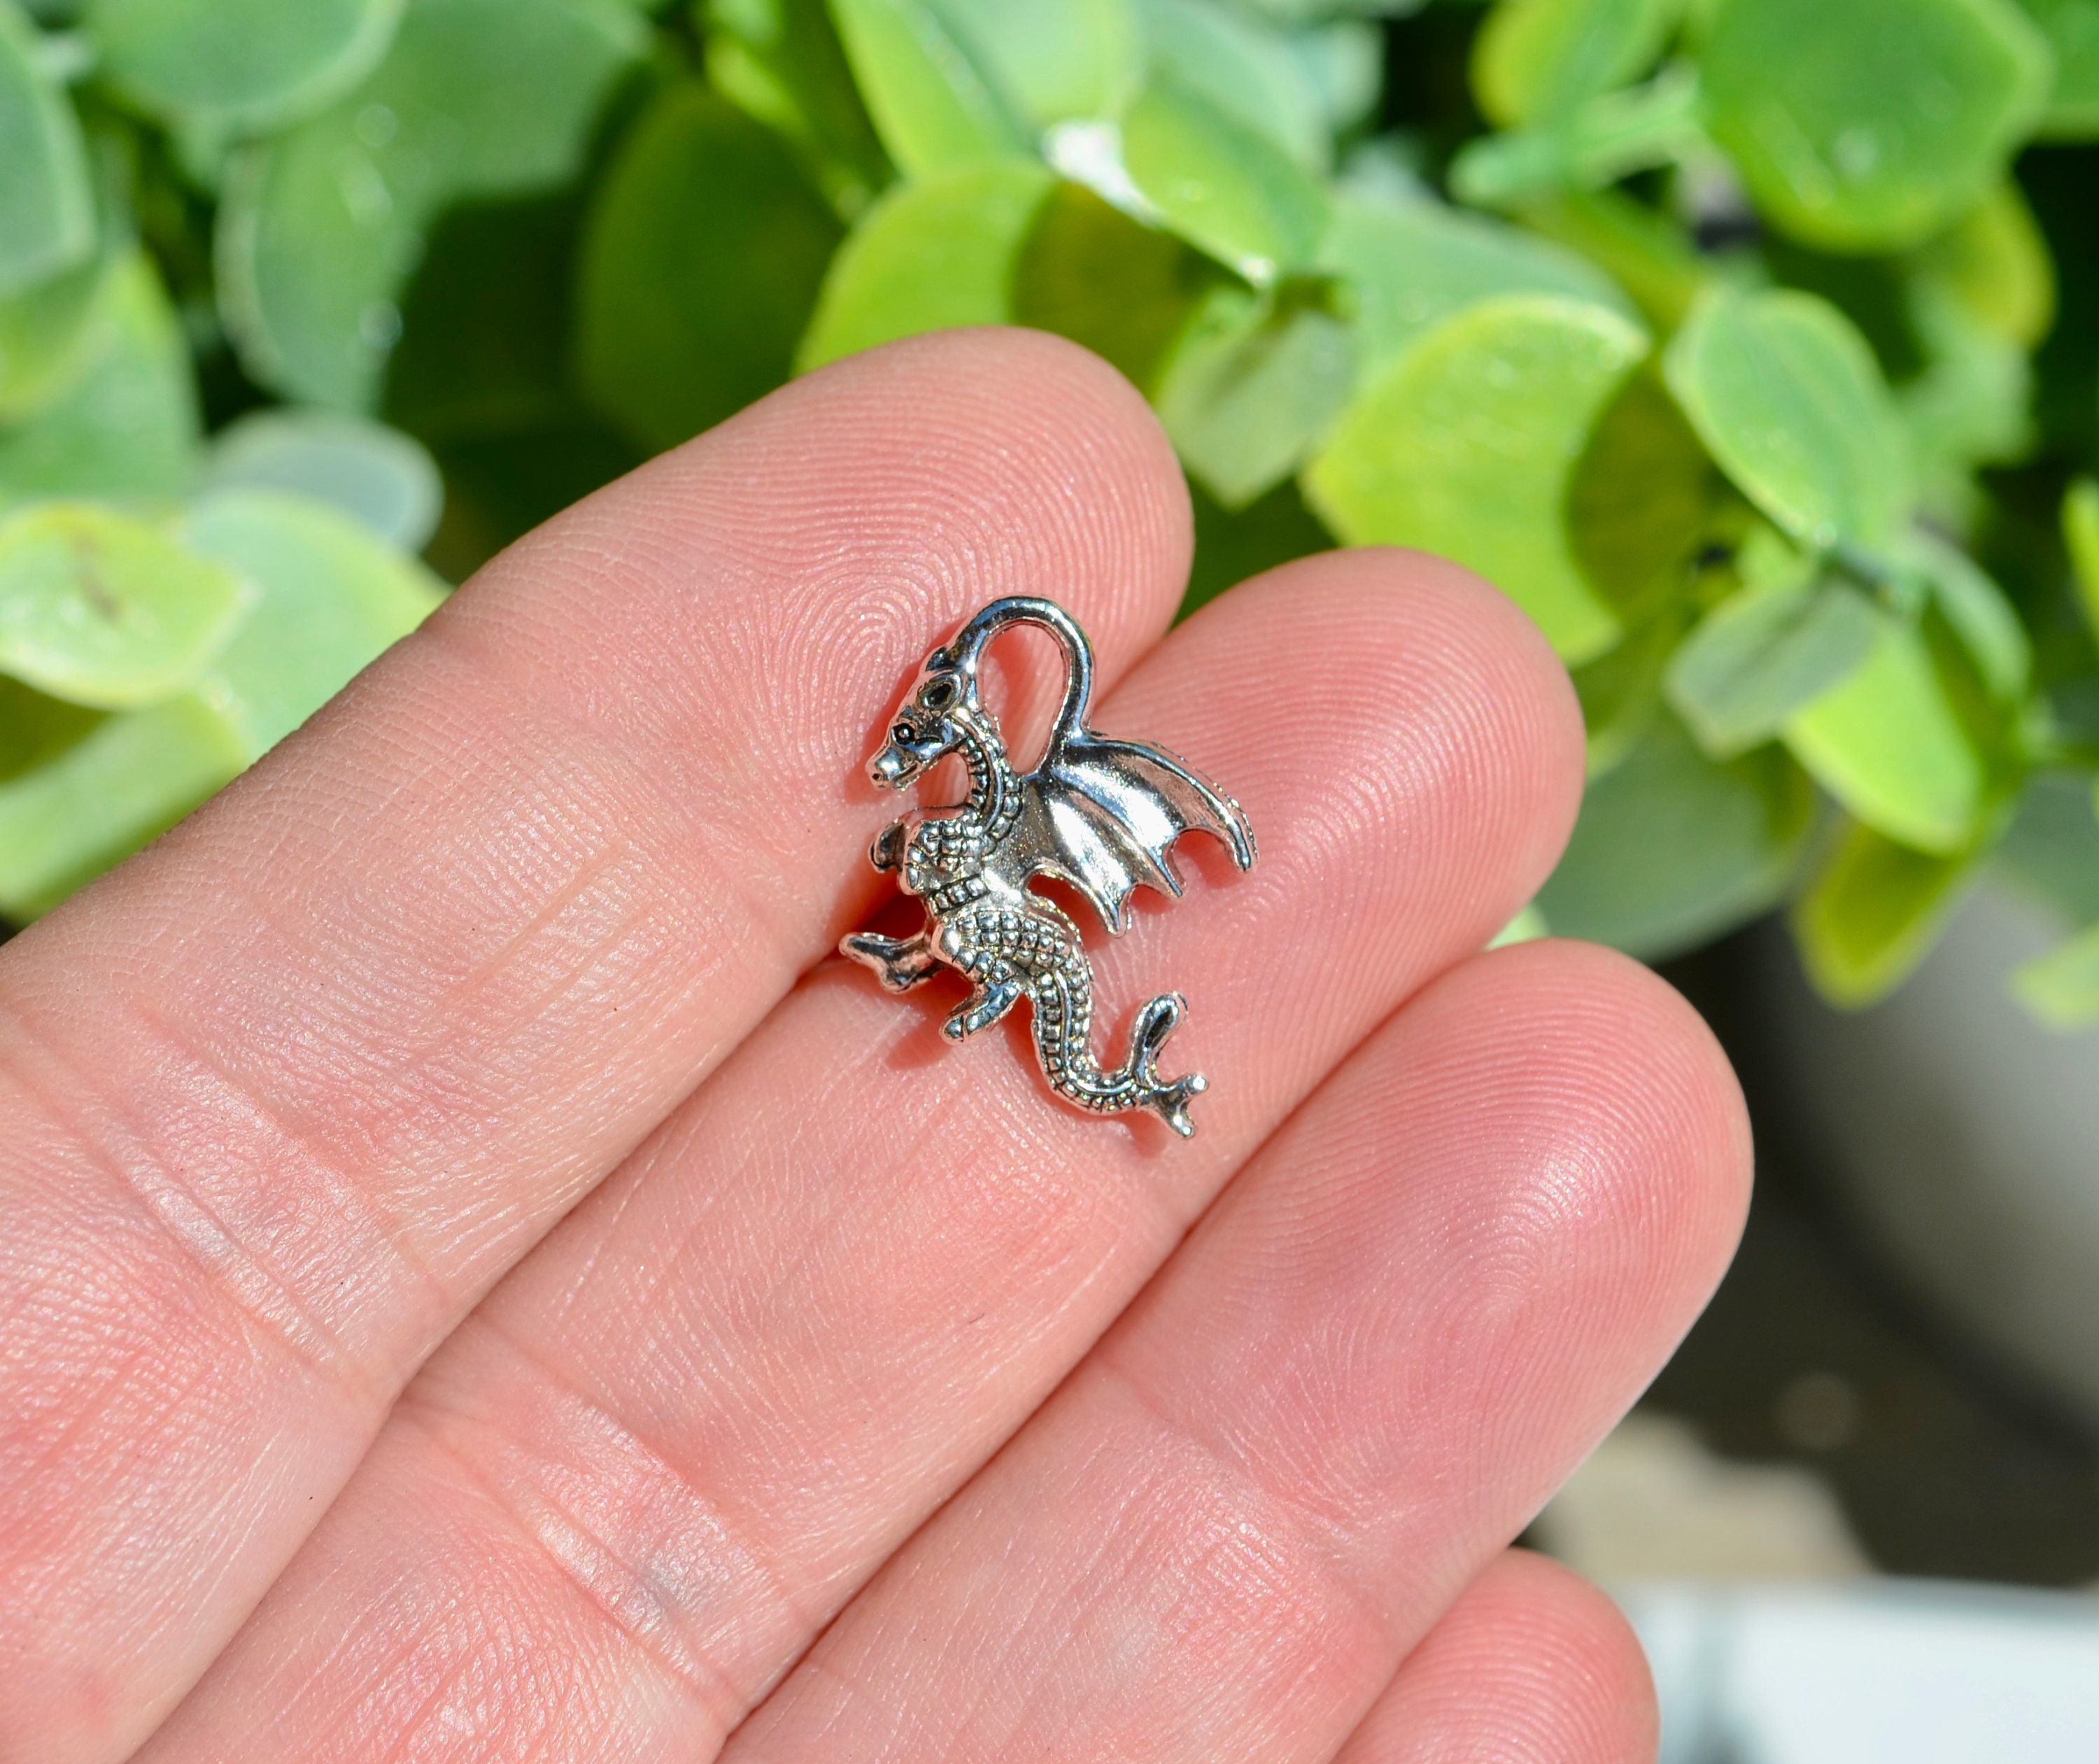 Chinese New Year, Year of The Dragon, Charms for Jewelry Making - ILikeWorms Style 3 / 25mm - Large